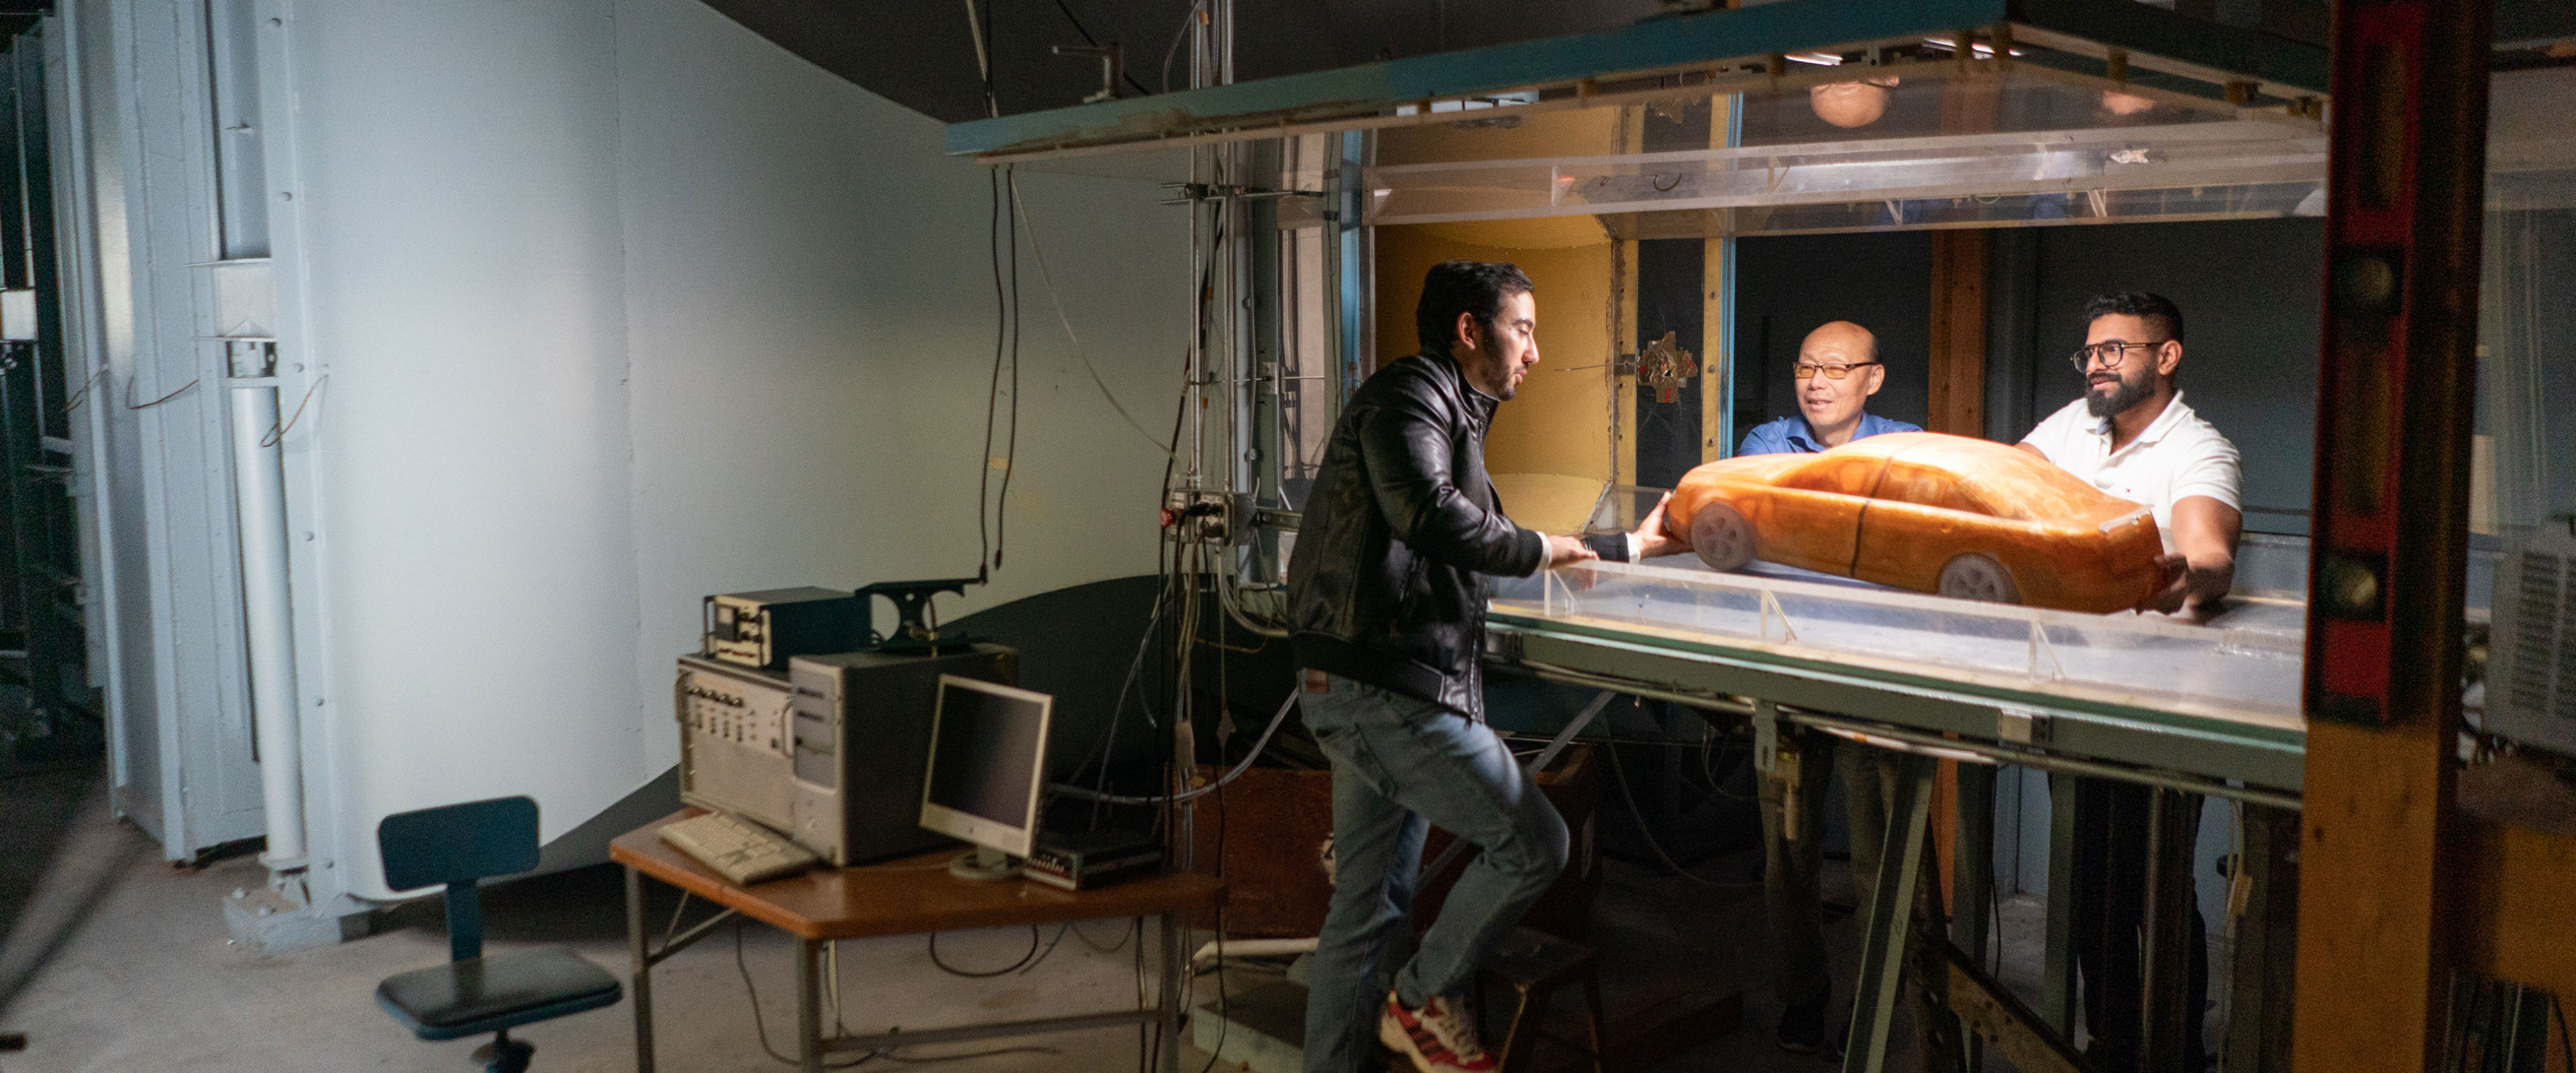 Liu in wind tunnel lab with two research students